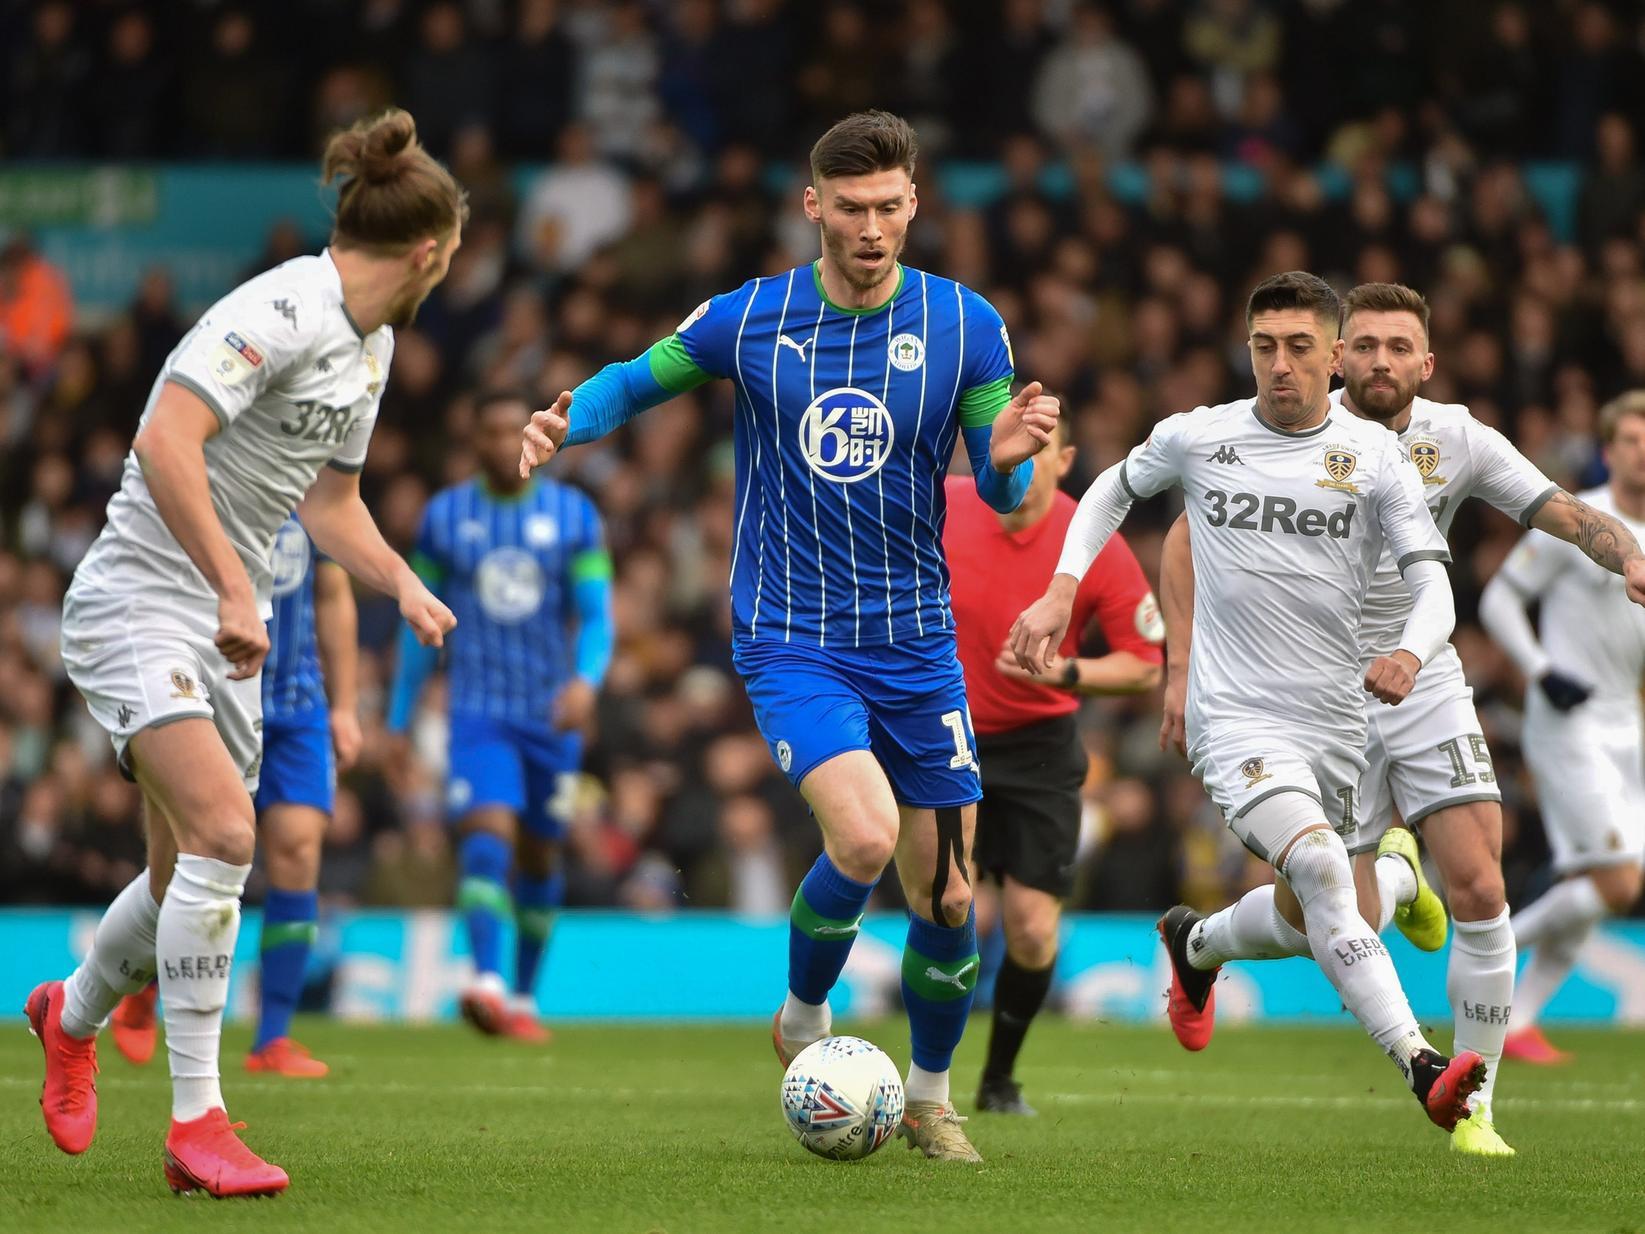 Wigan striker Kieffer Moore has warned Preston after back-to-back wins that they have turned a corner while Alex Neil has urged his teams form to improve away from hope as they chase their Premier League dream.